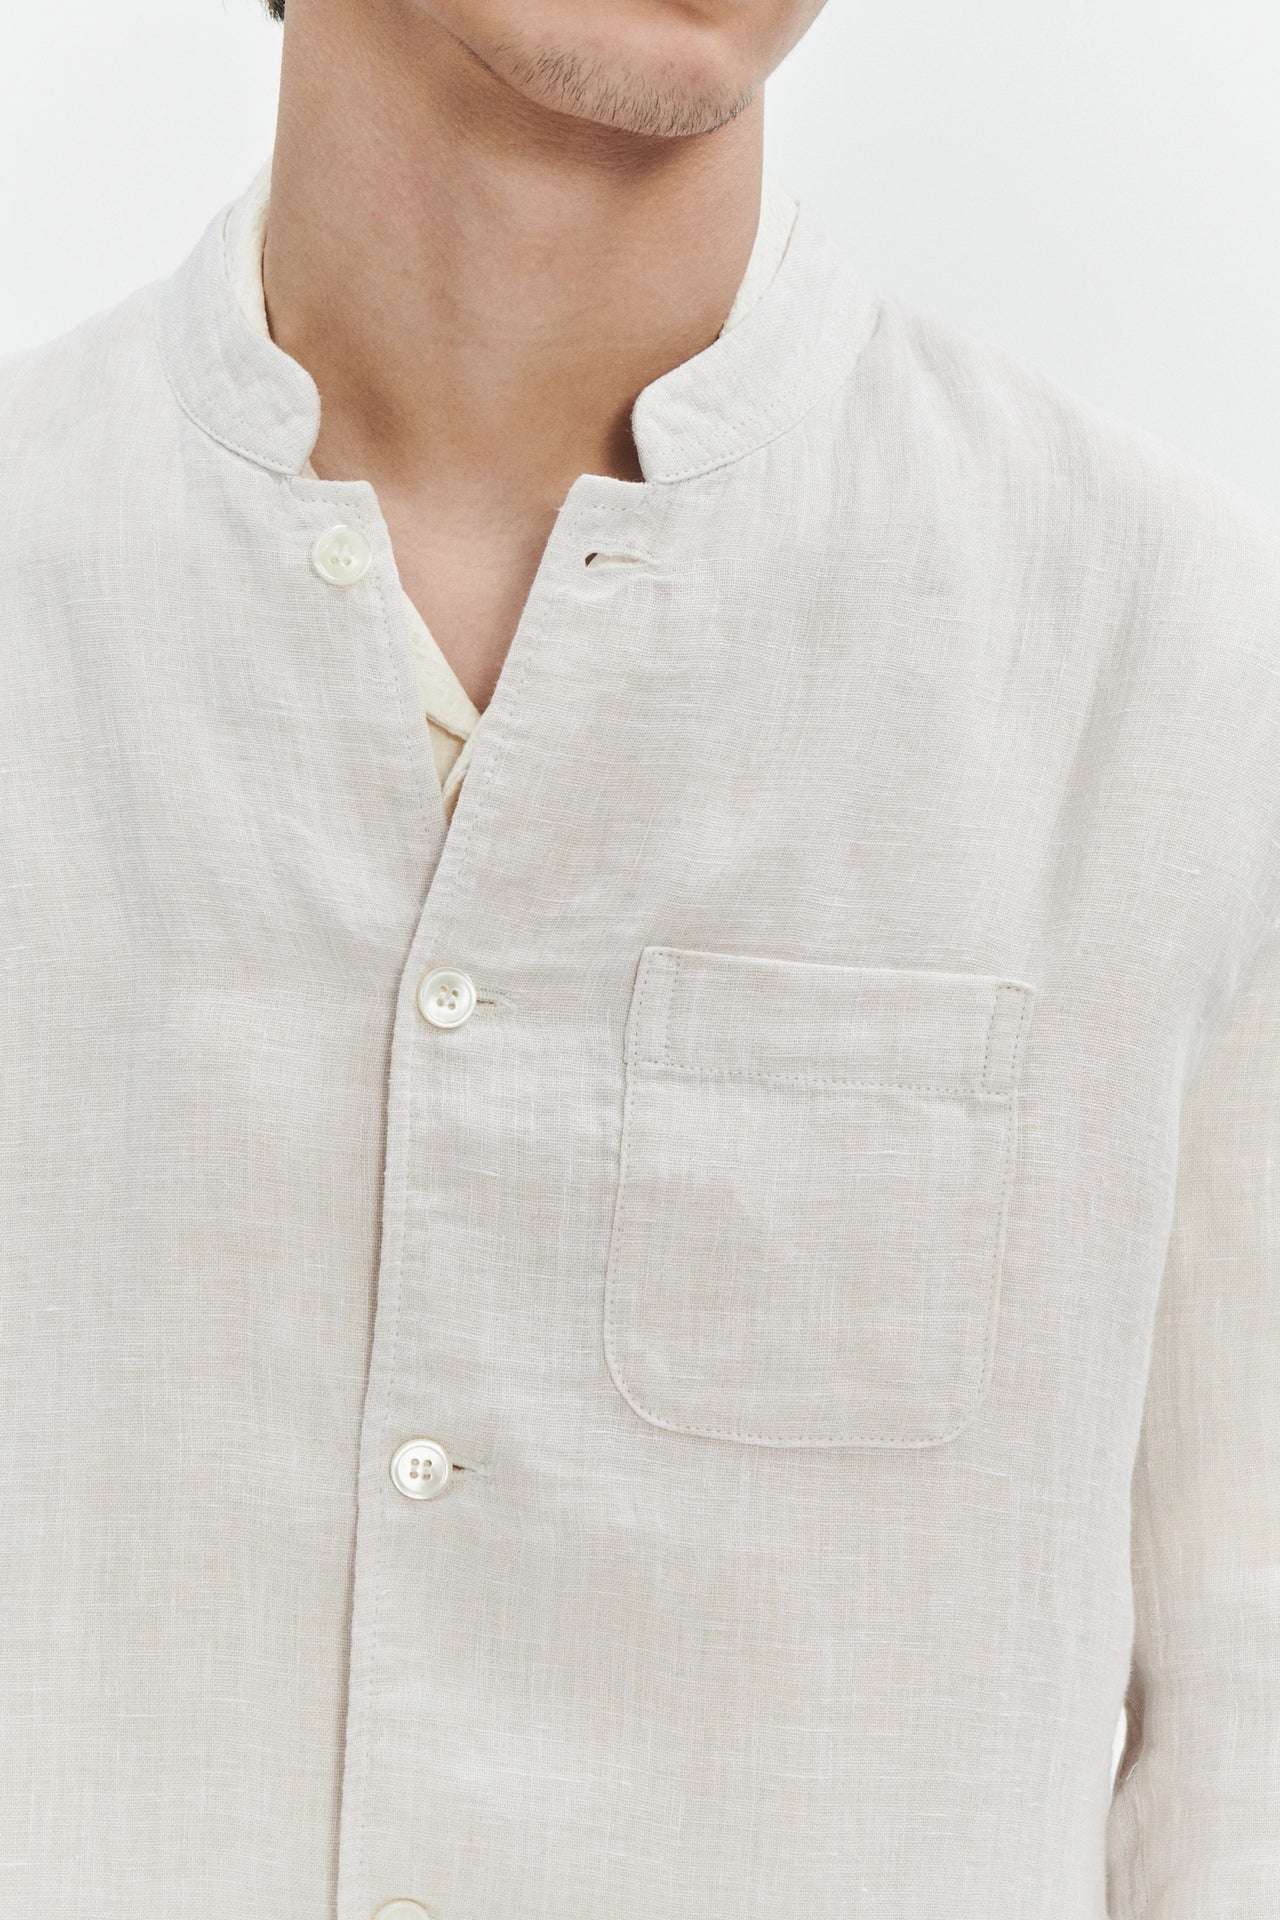 Strong Jacket in an Off-White Double Sided Fatigue Italian Linen and Cotton